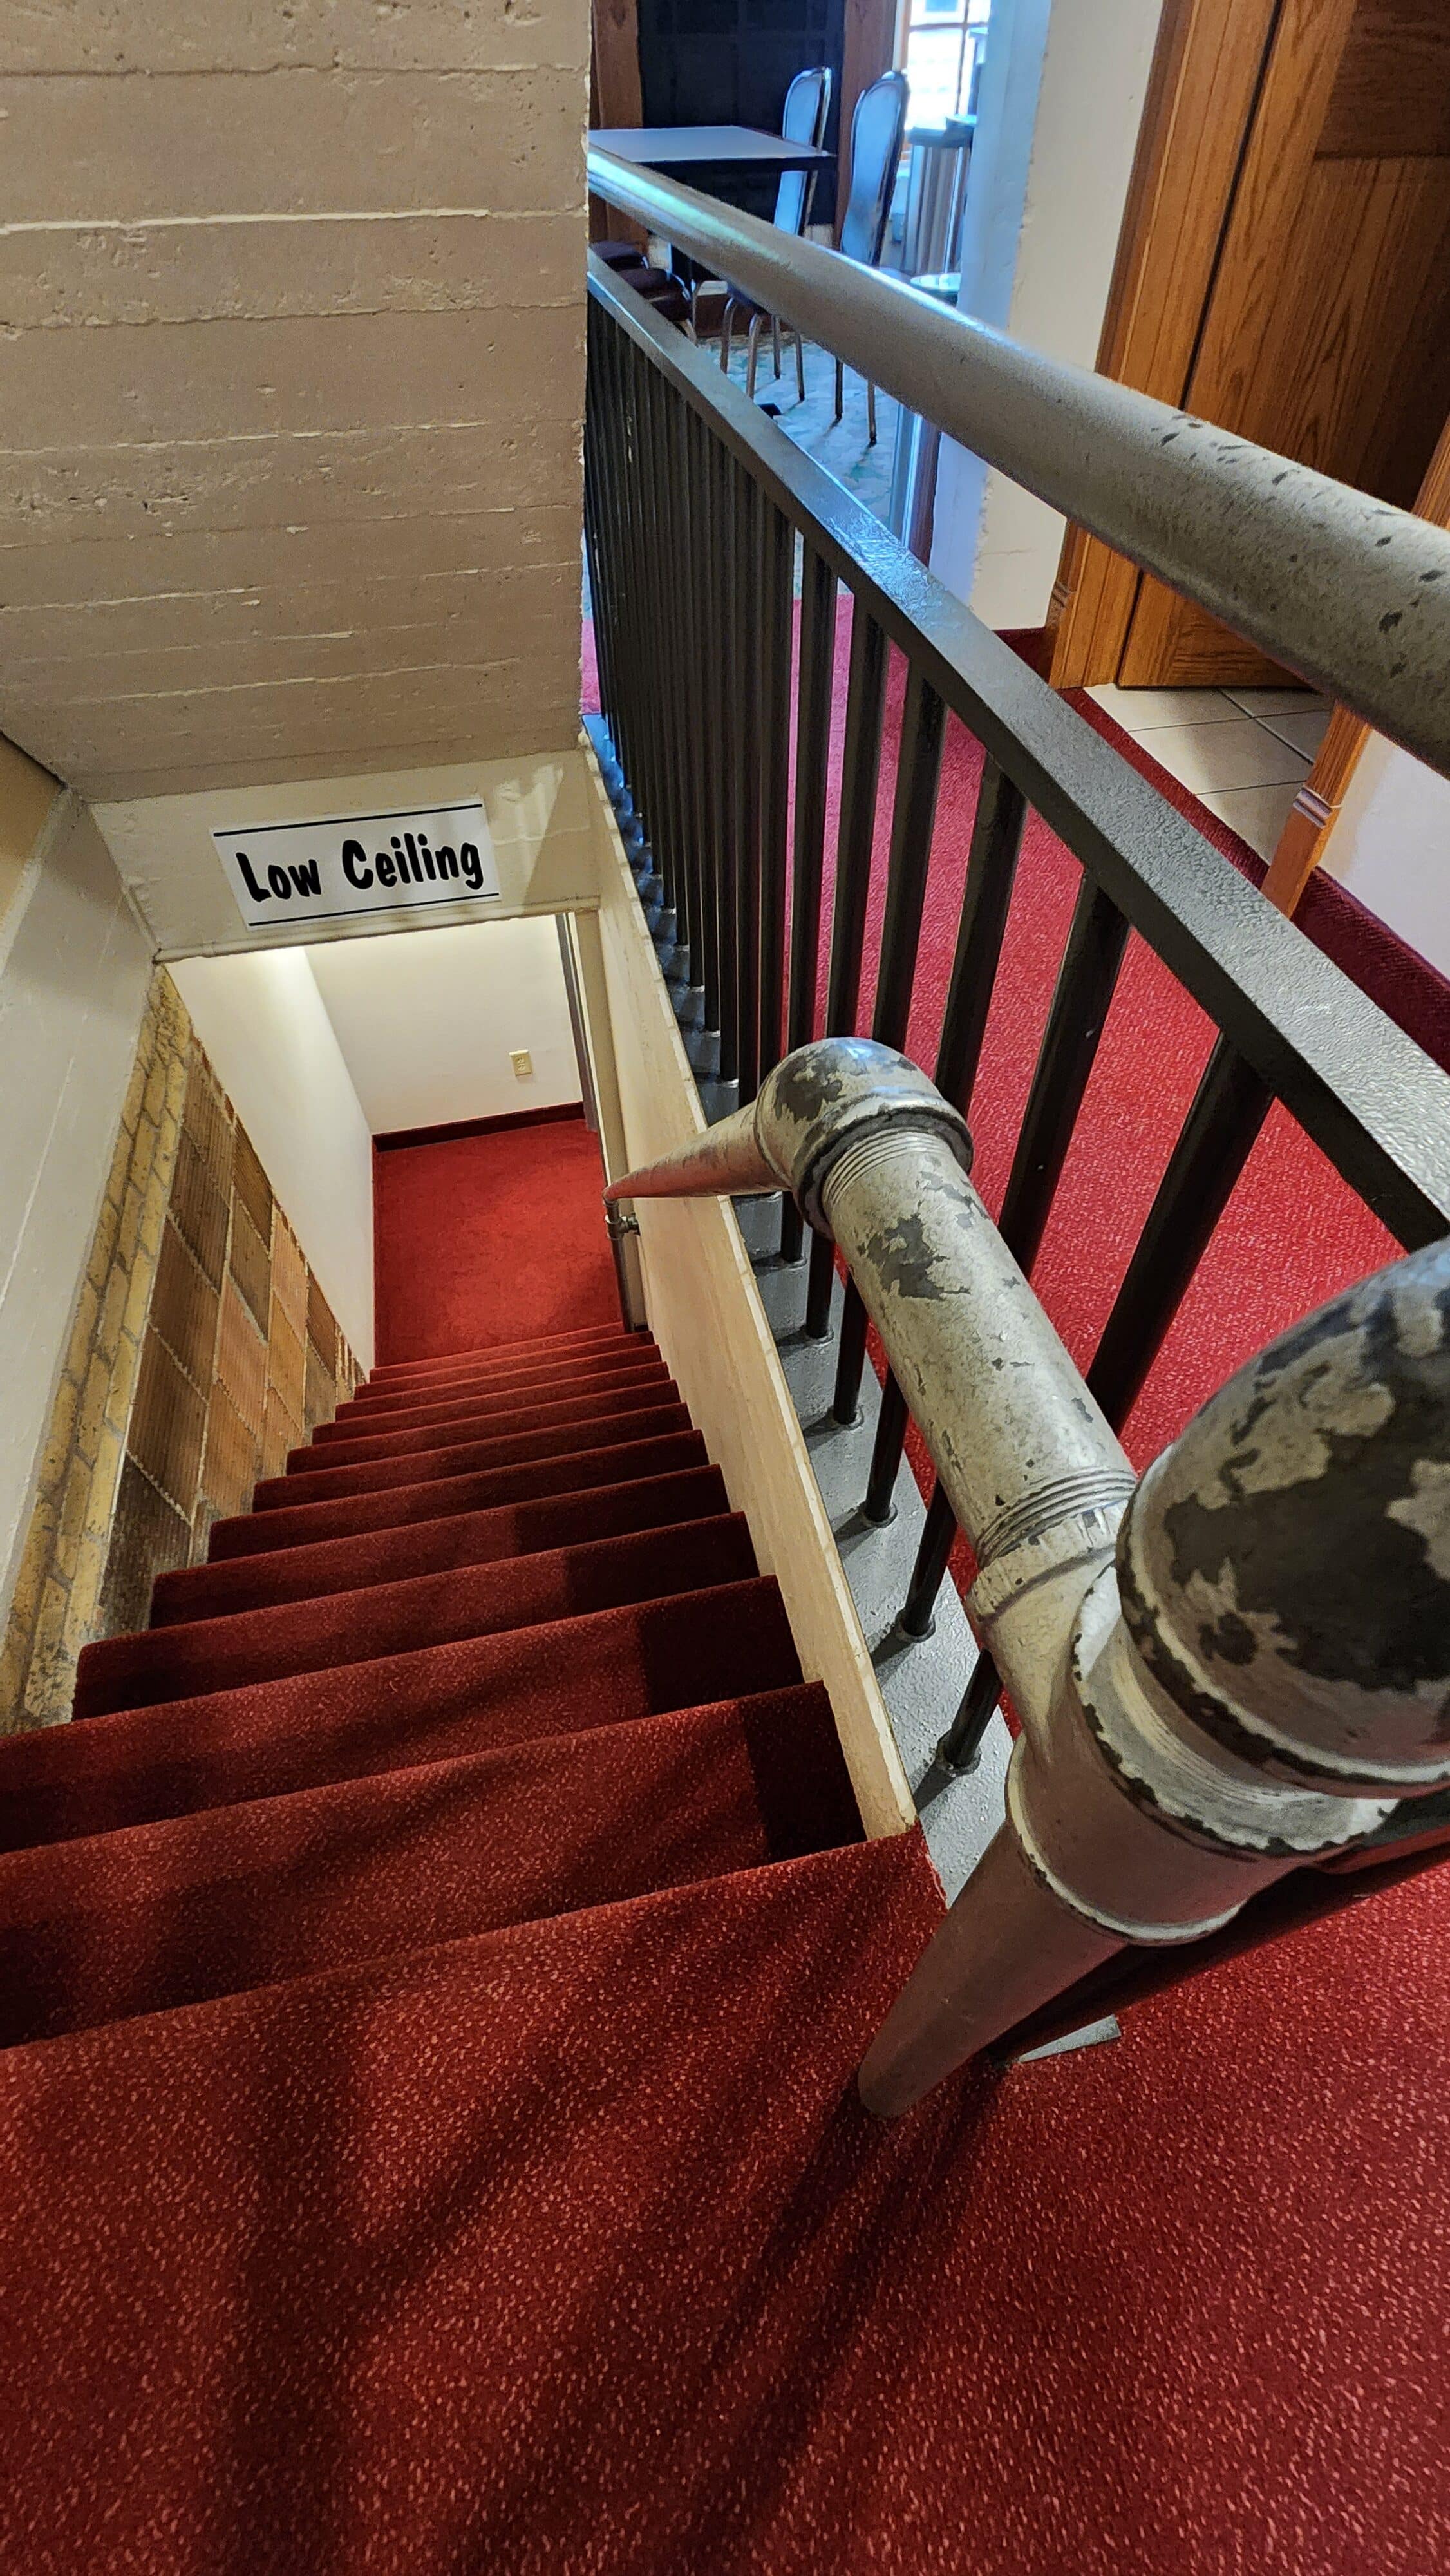 Stairs at Stone Mill with low ceiling